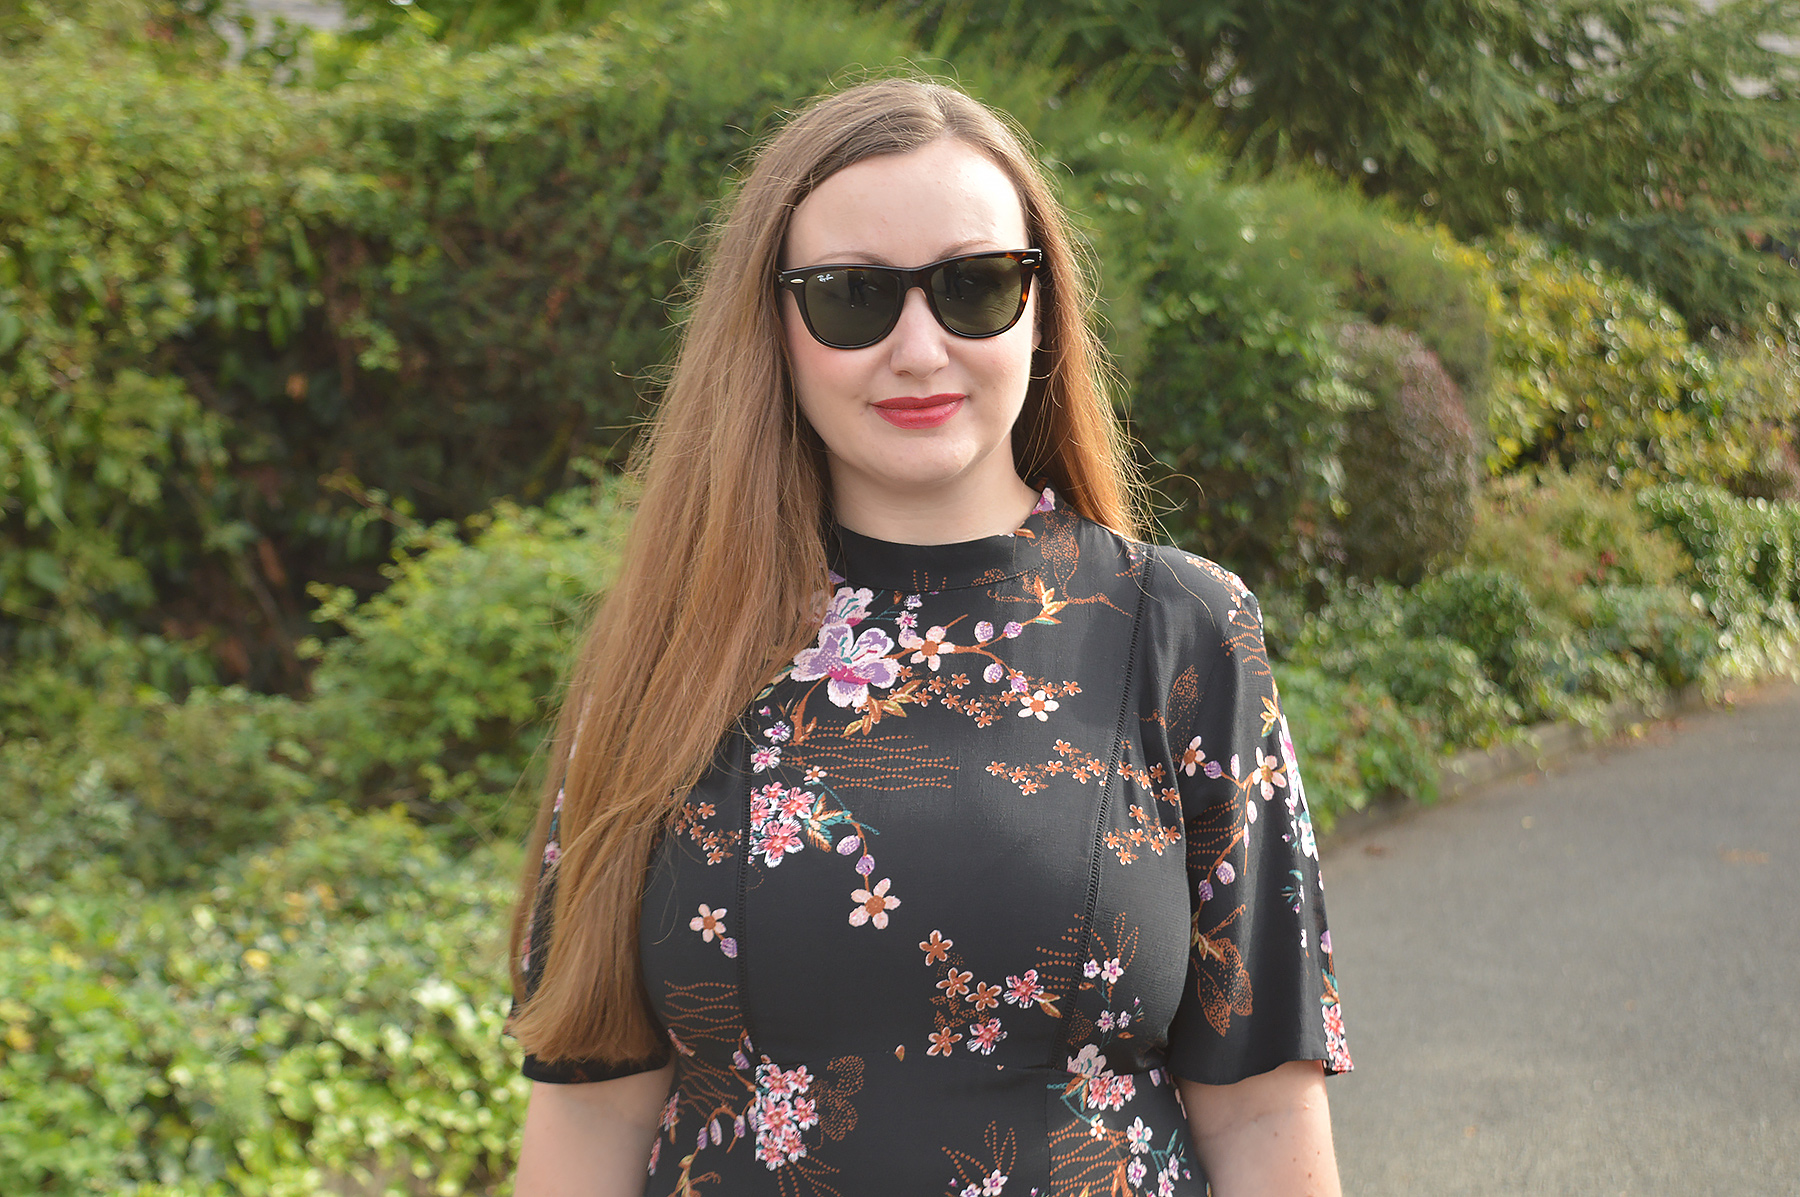 Cherry blossom printed blouse